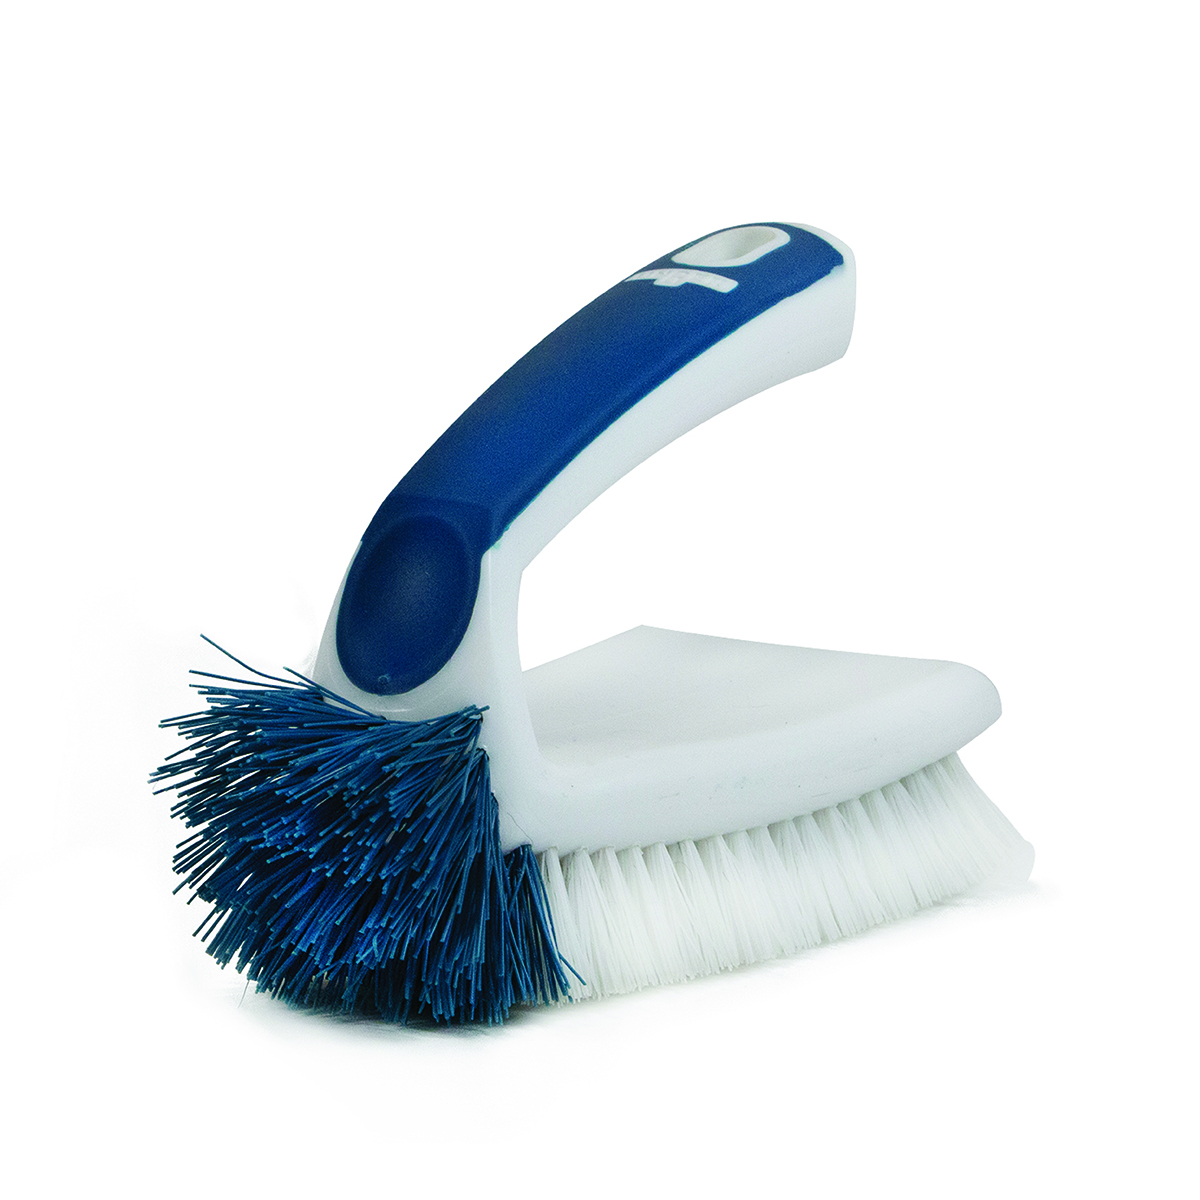 Bathroom Cleaning Products  Squeegee's, Scrubbers, & Bath Brushes